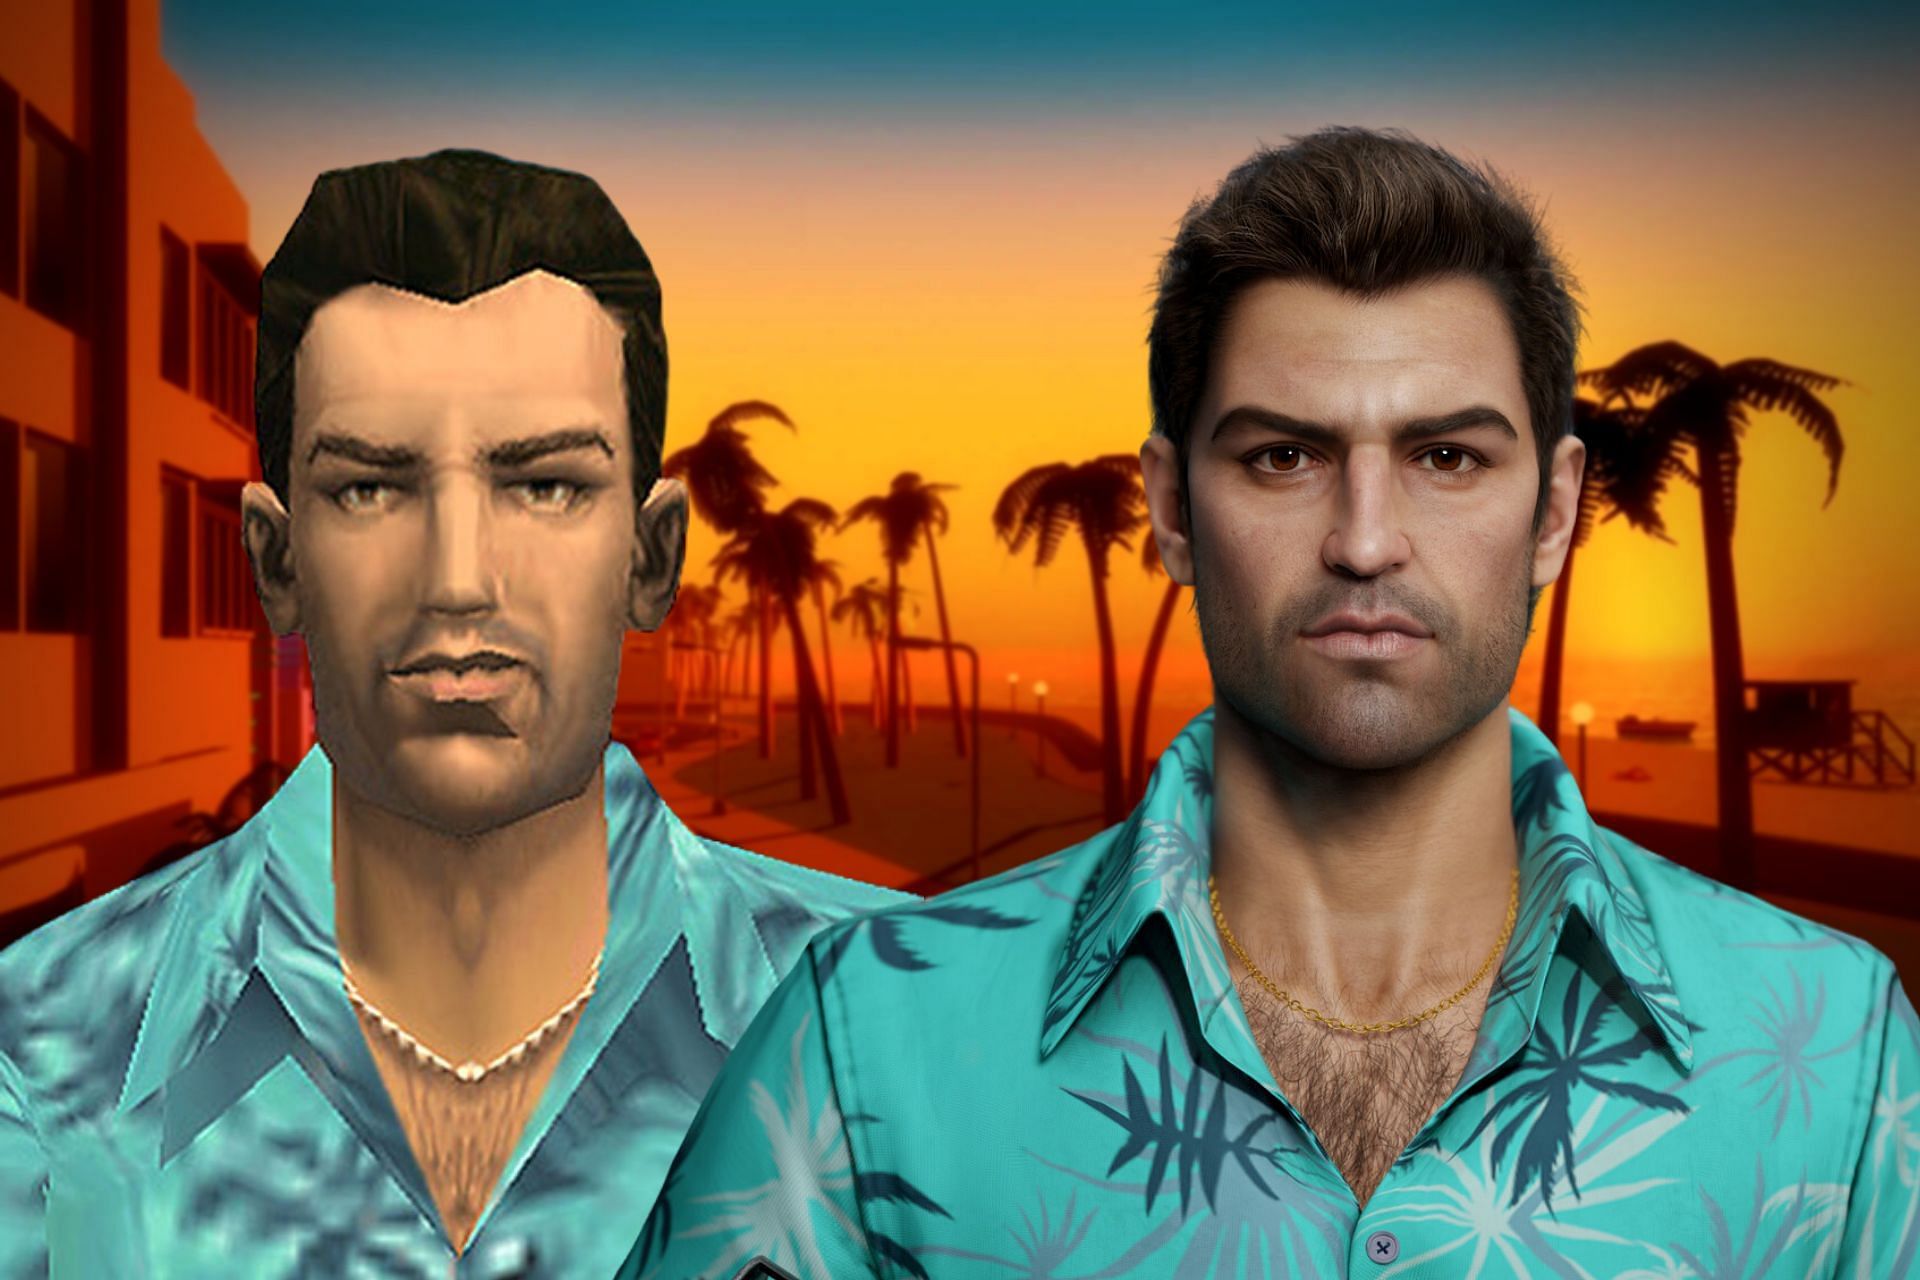 GTA Vice City is a legendary game that deserves to be introduced to new audiences in a proper way (Image via Sportskeeda)